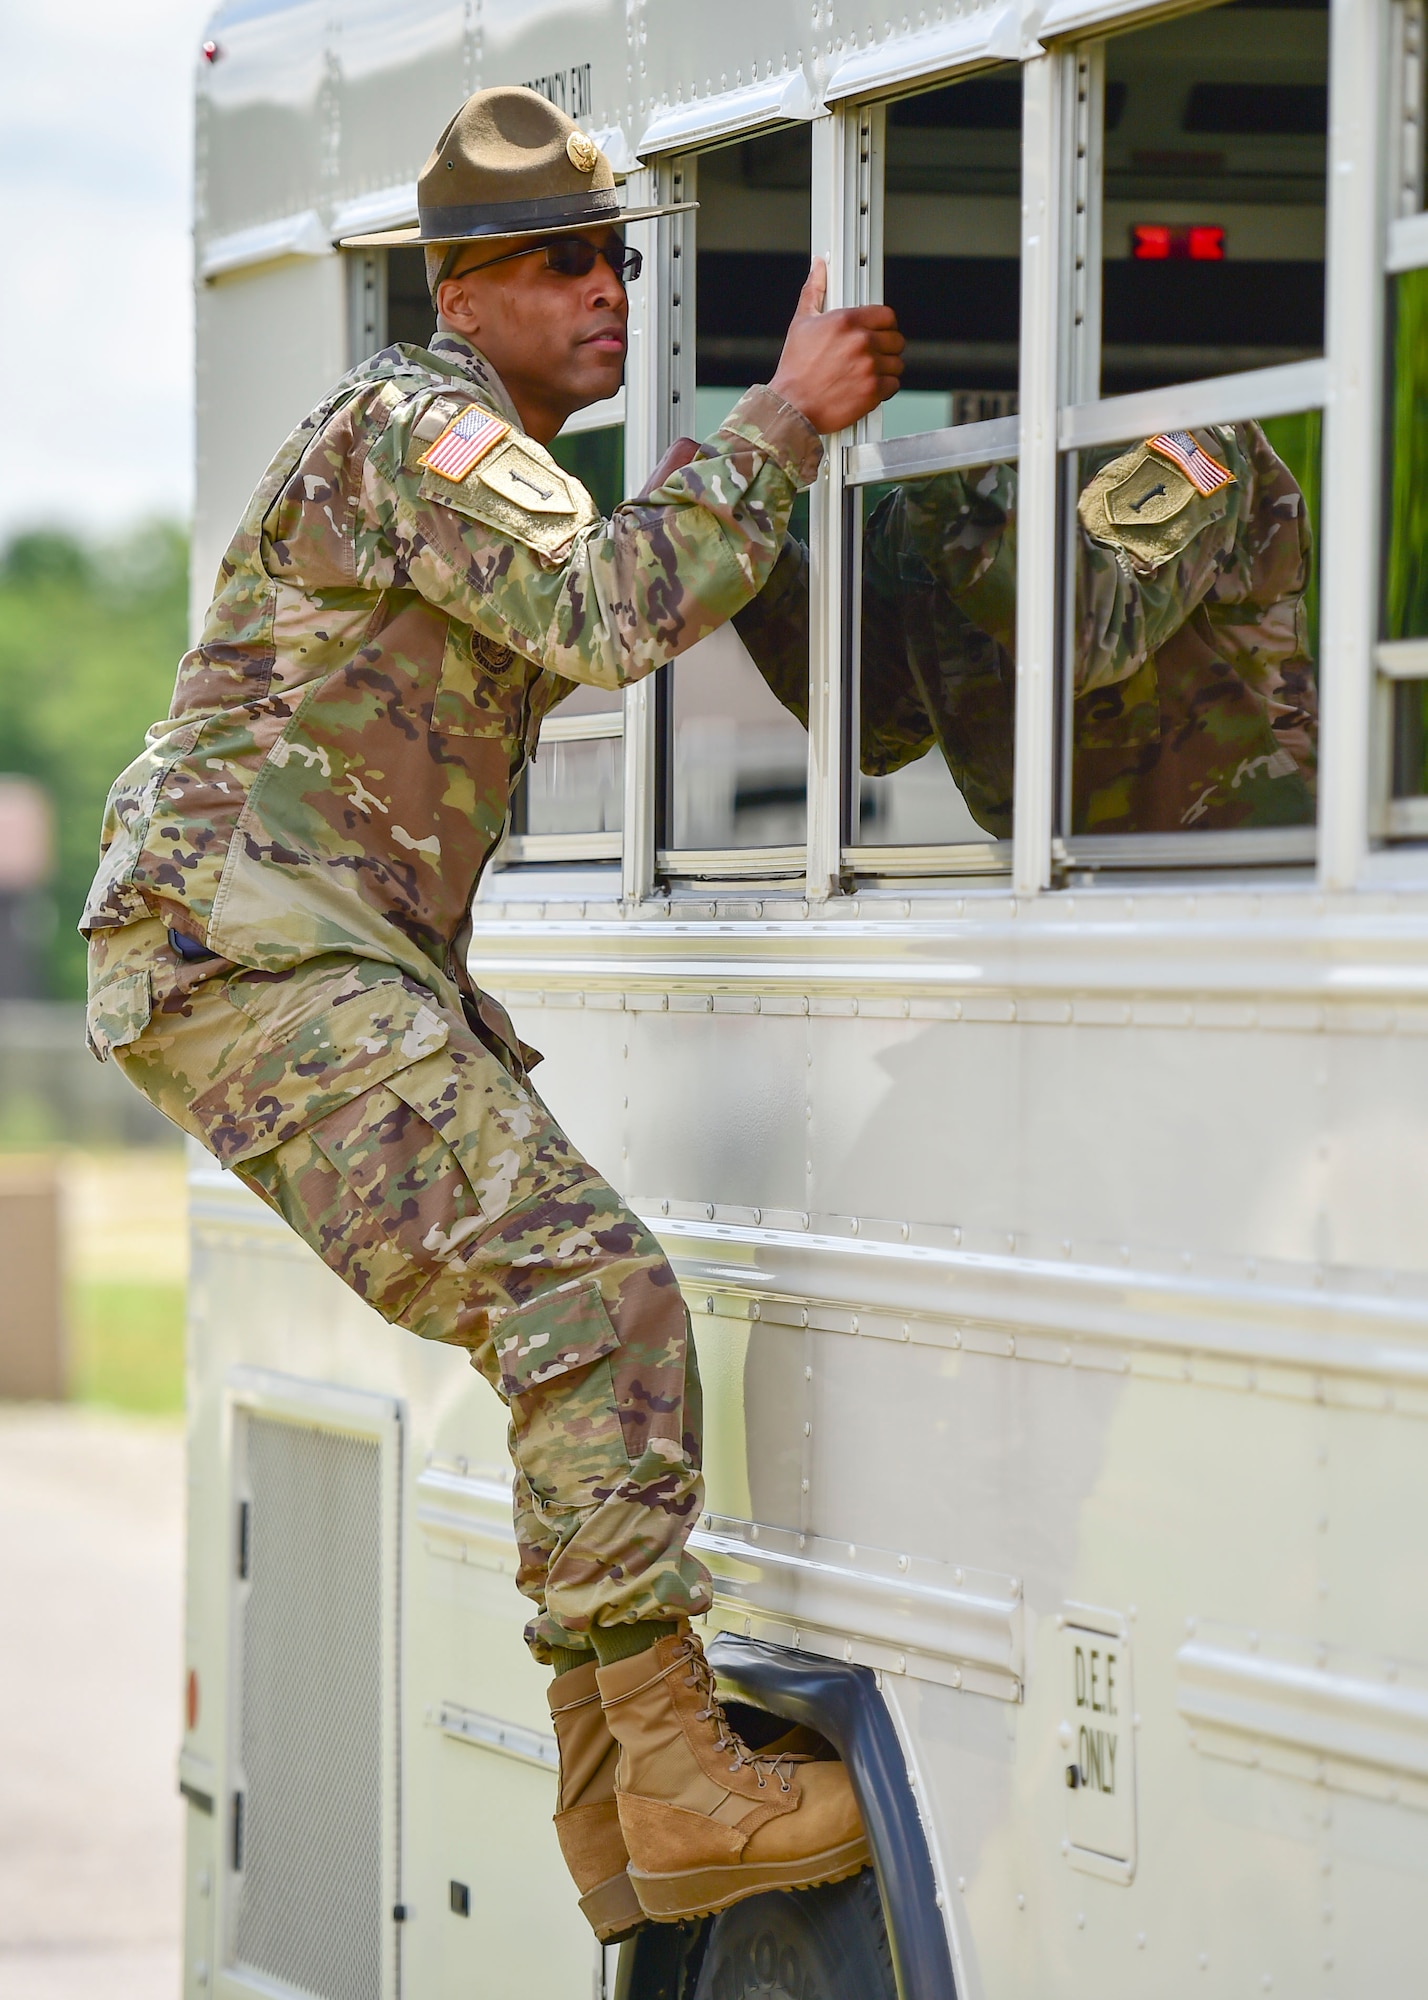 U.S. Army Staff Sgt. Brandon Curry, a drill sergeant with the 1st Bn., 390th Inf. Reg., tells Junior Reserve Officer Training Corps (JROTC) cadets to get off his bus during an encampment here, June 21, 2017. The encampment, facilitated by 910th Airlift Wing Airmen and Curry, provided a five-day experience teaching military skills and replicating aspects of Basic Military Training. JROTC is a program sponsored by the Armed Forces for high school students across the country. (U.S. Air Force photo/Eric White)